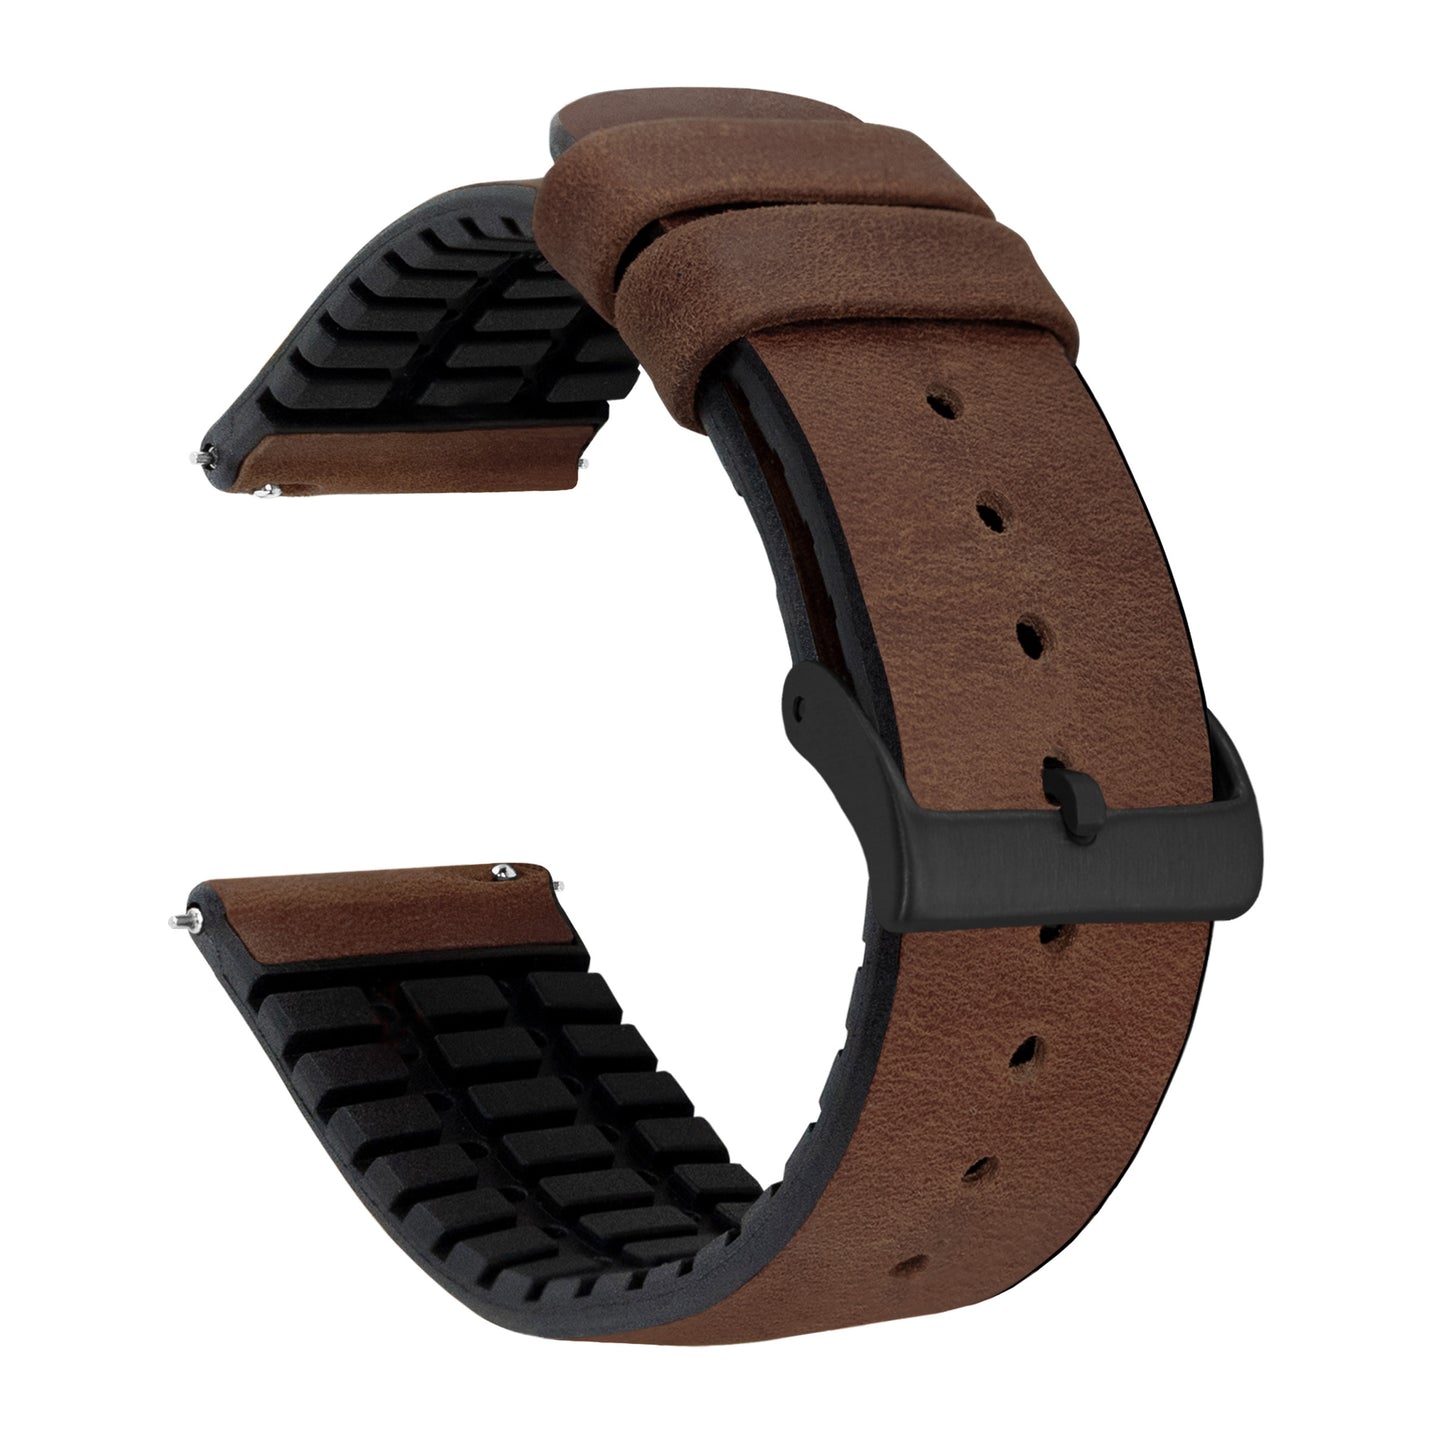 Amazfit Bip | Leather and Rubber Hybrid | Walnut Brown - Barton Watch Bands